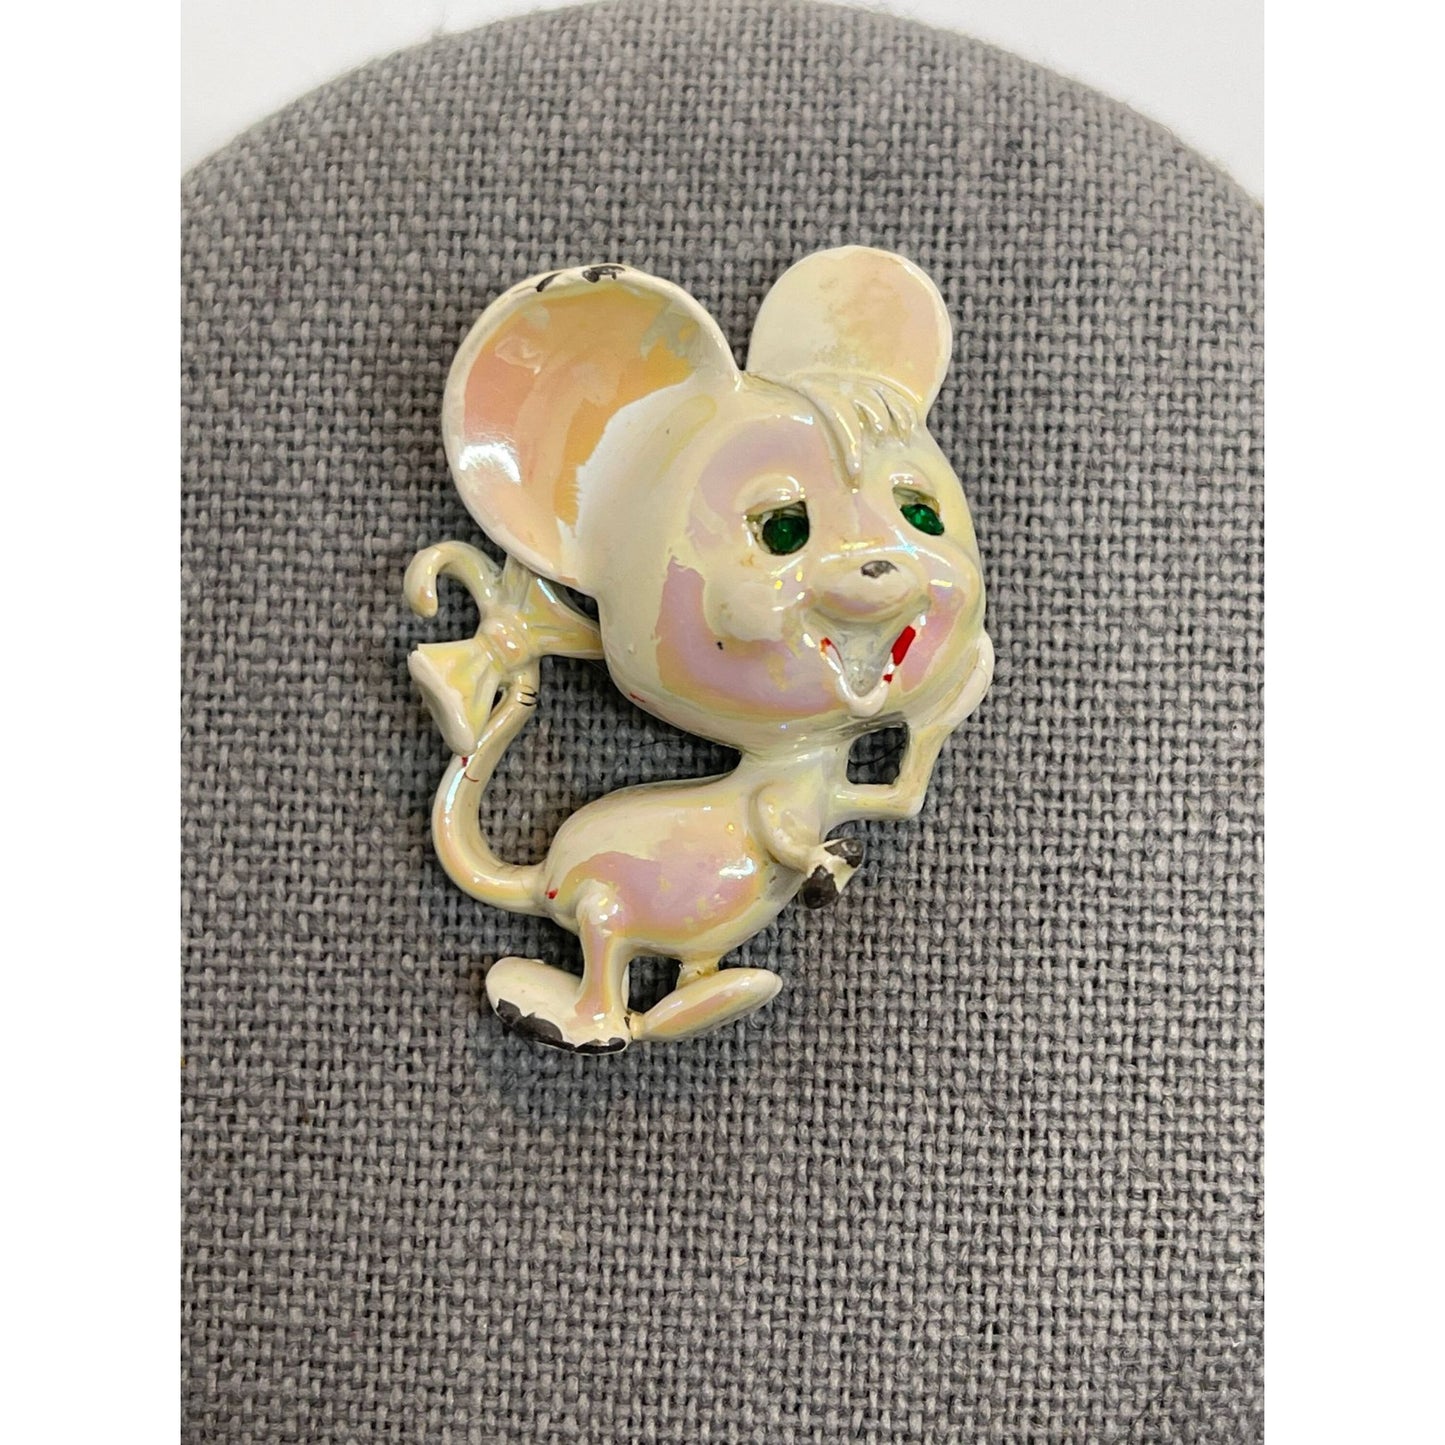 Vintage Cute White Mouse Pin Brooch